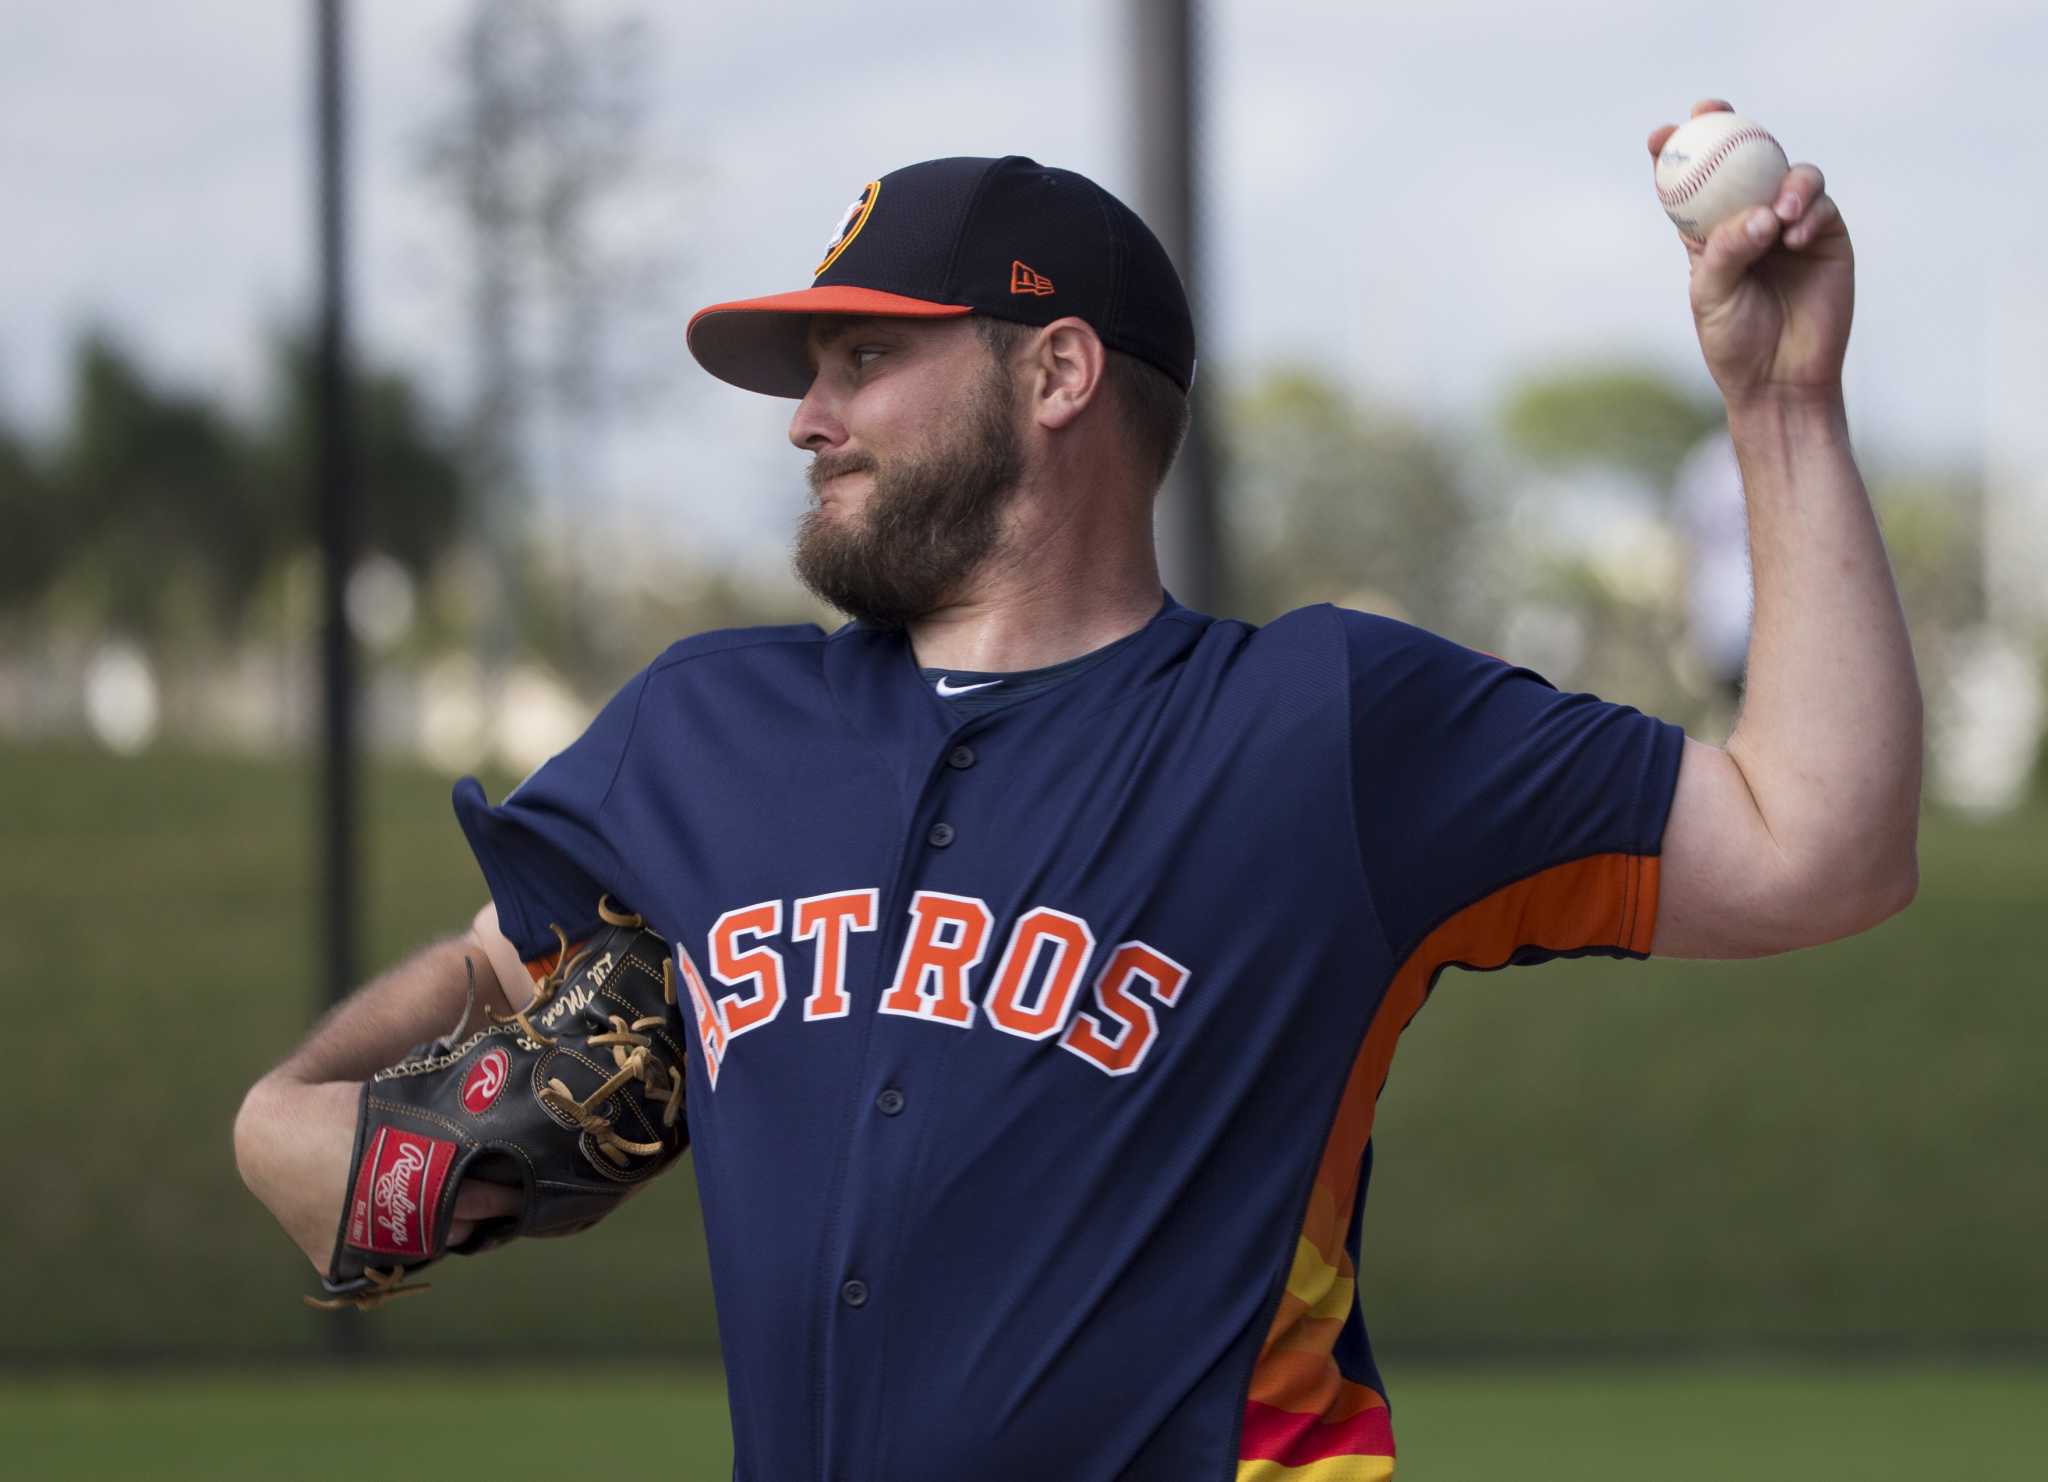 Astros' Lance McCullers honors Dallas Keuchel before home opener